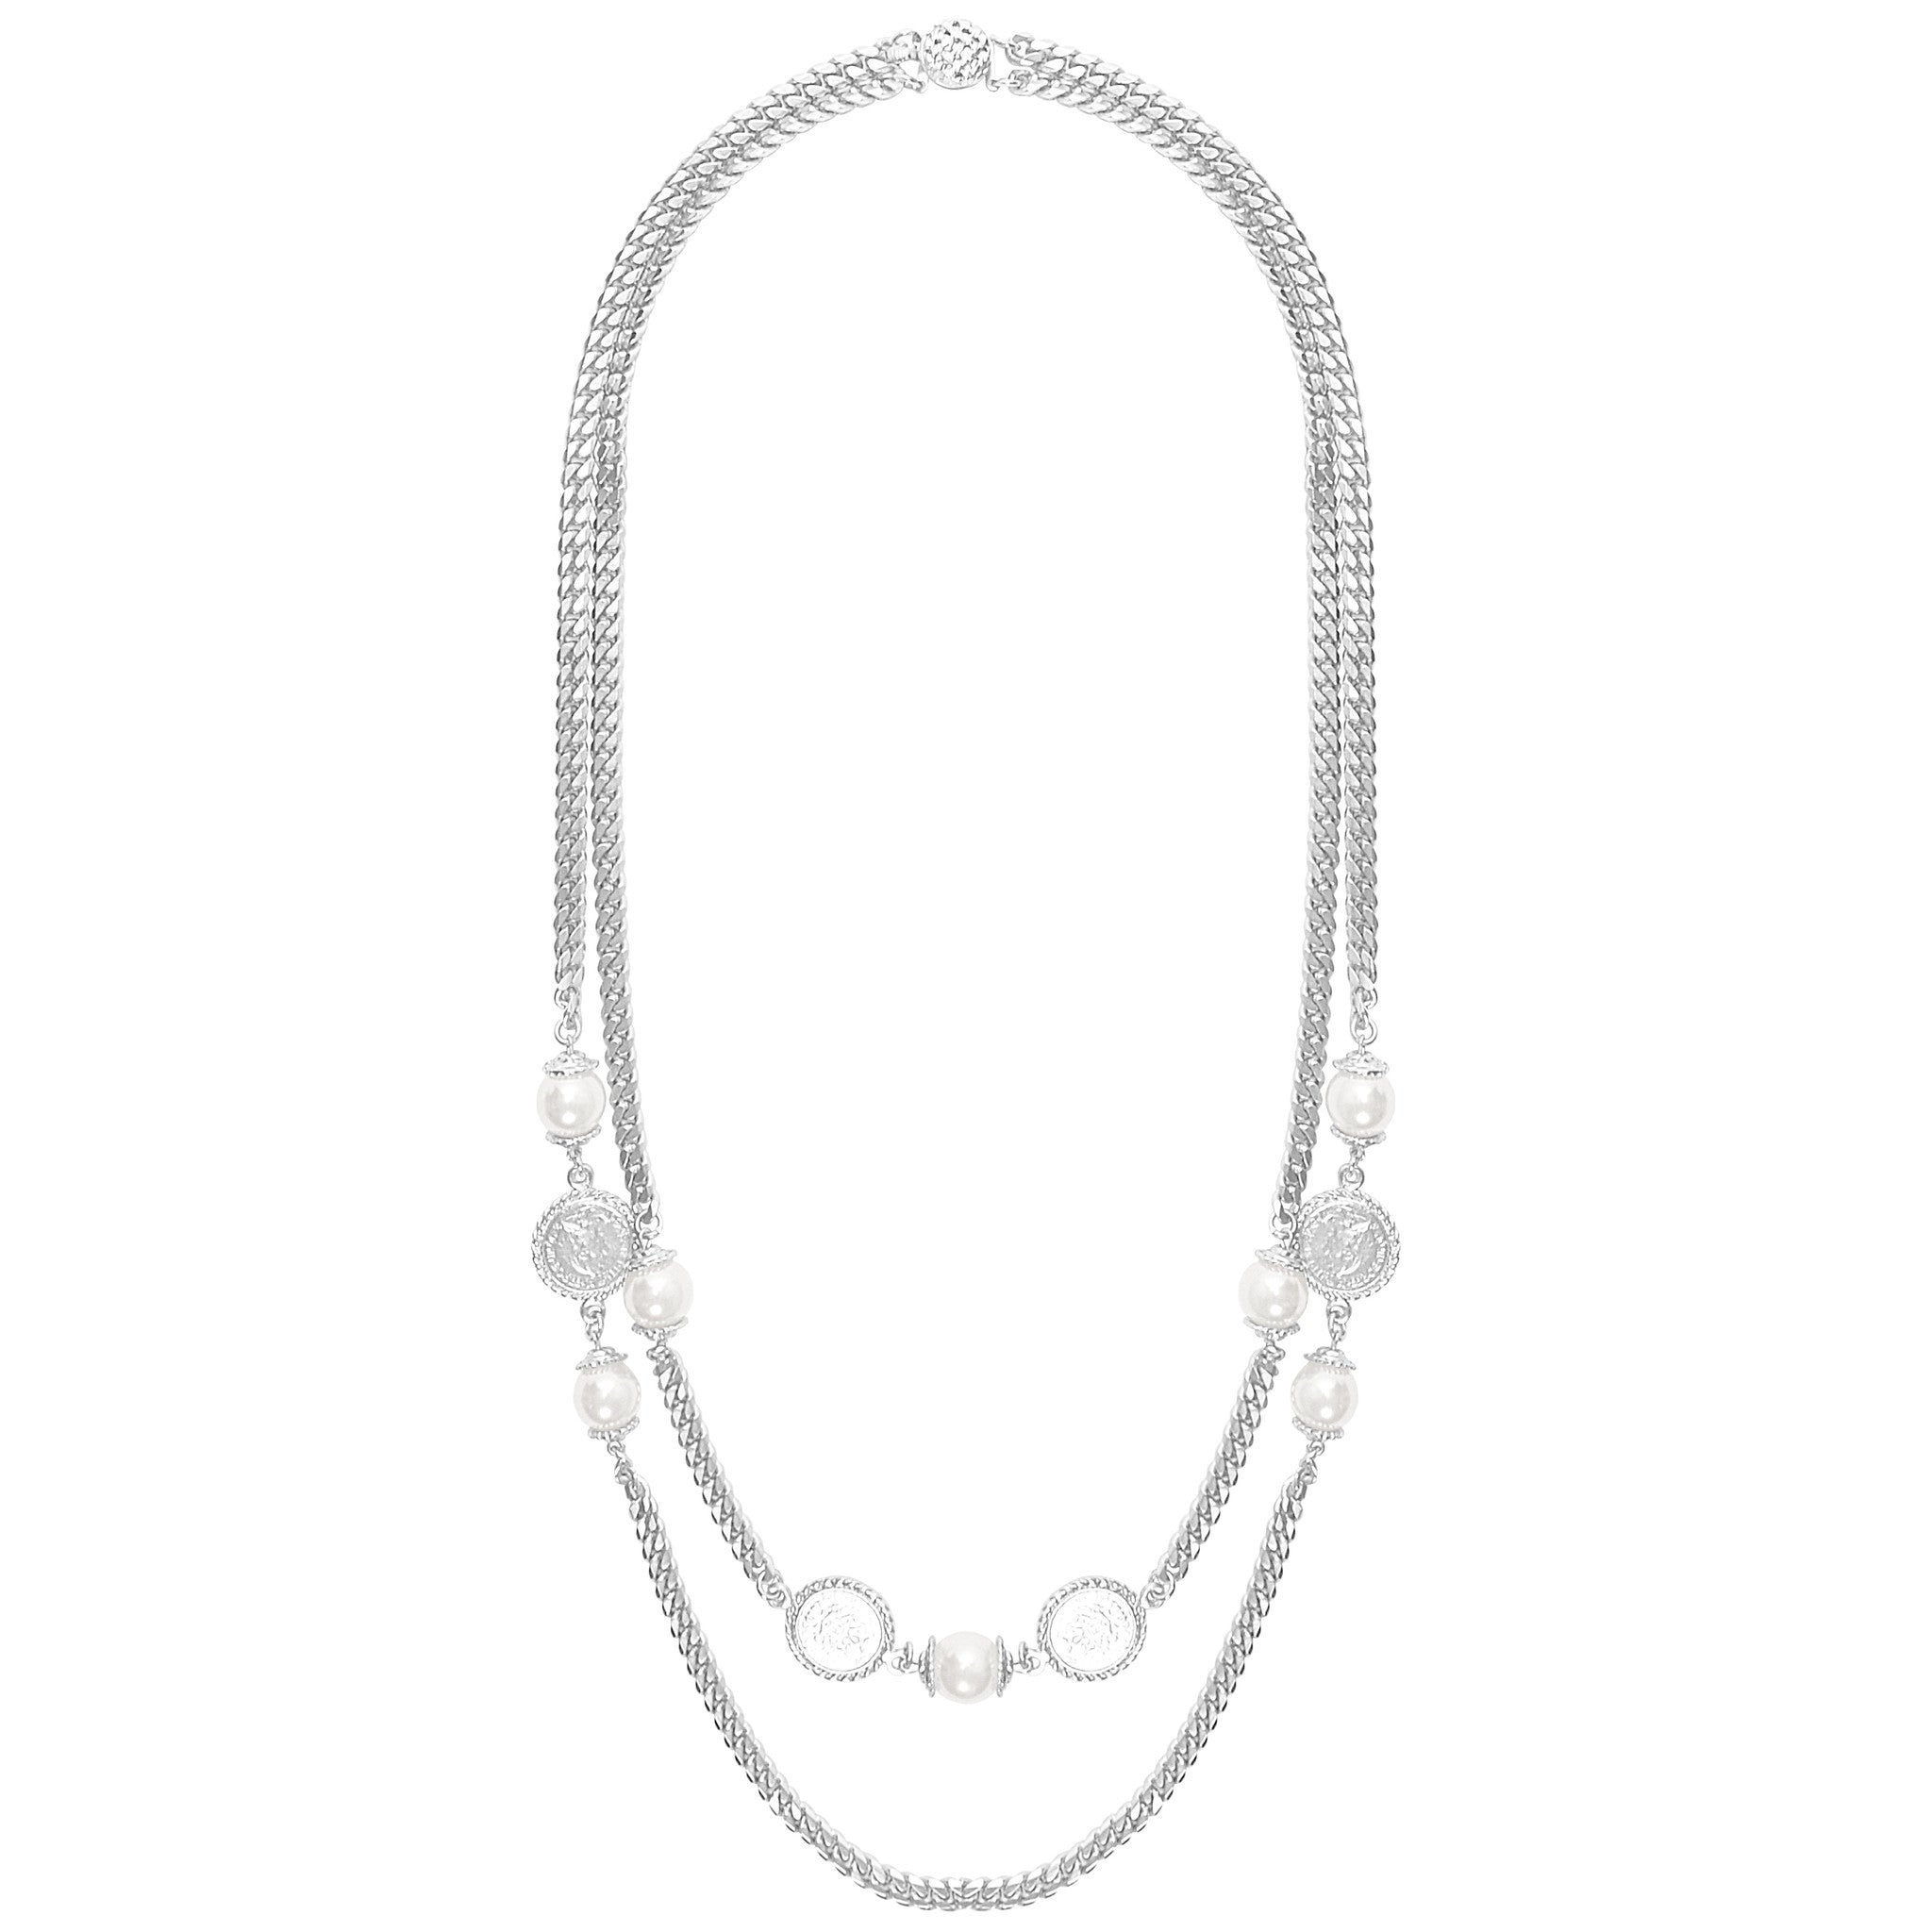 Layered Curb Link Pearl and Coin Necklace - Karine Sultan